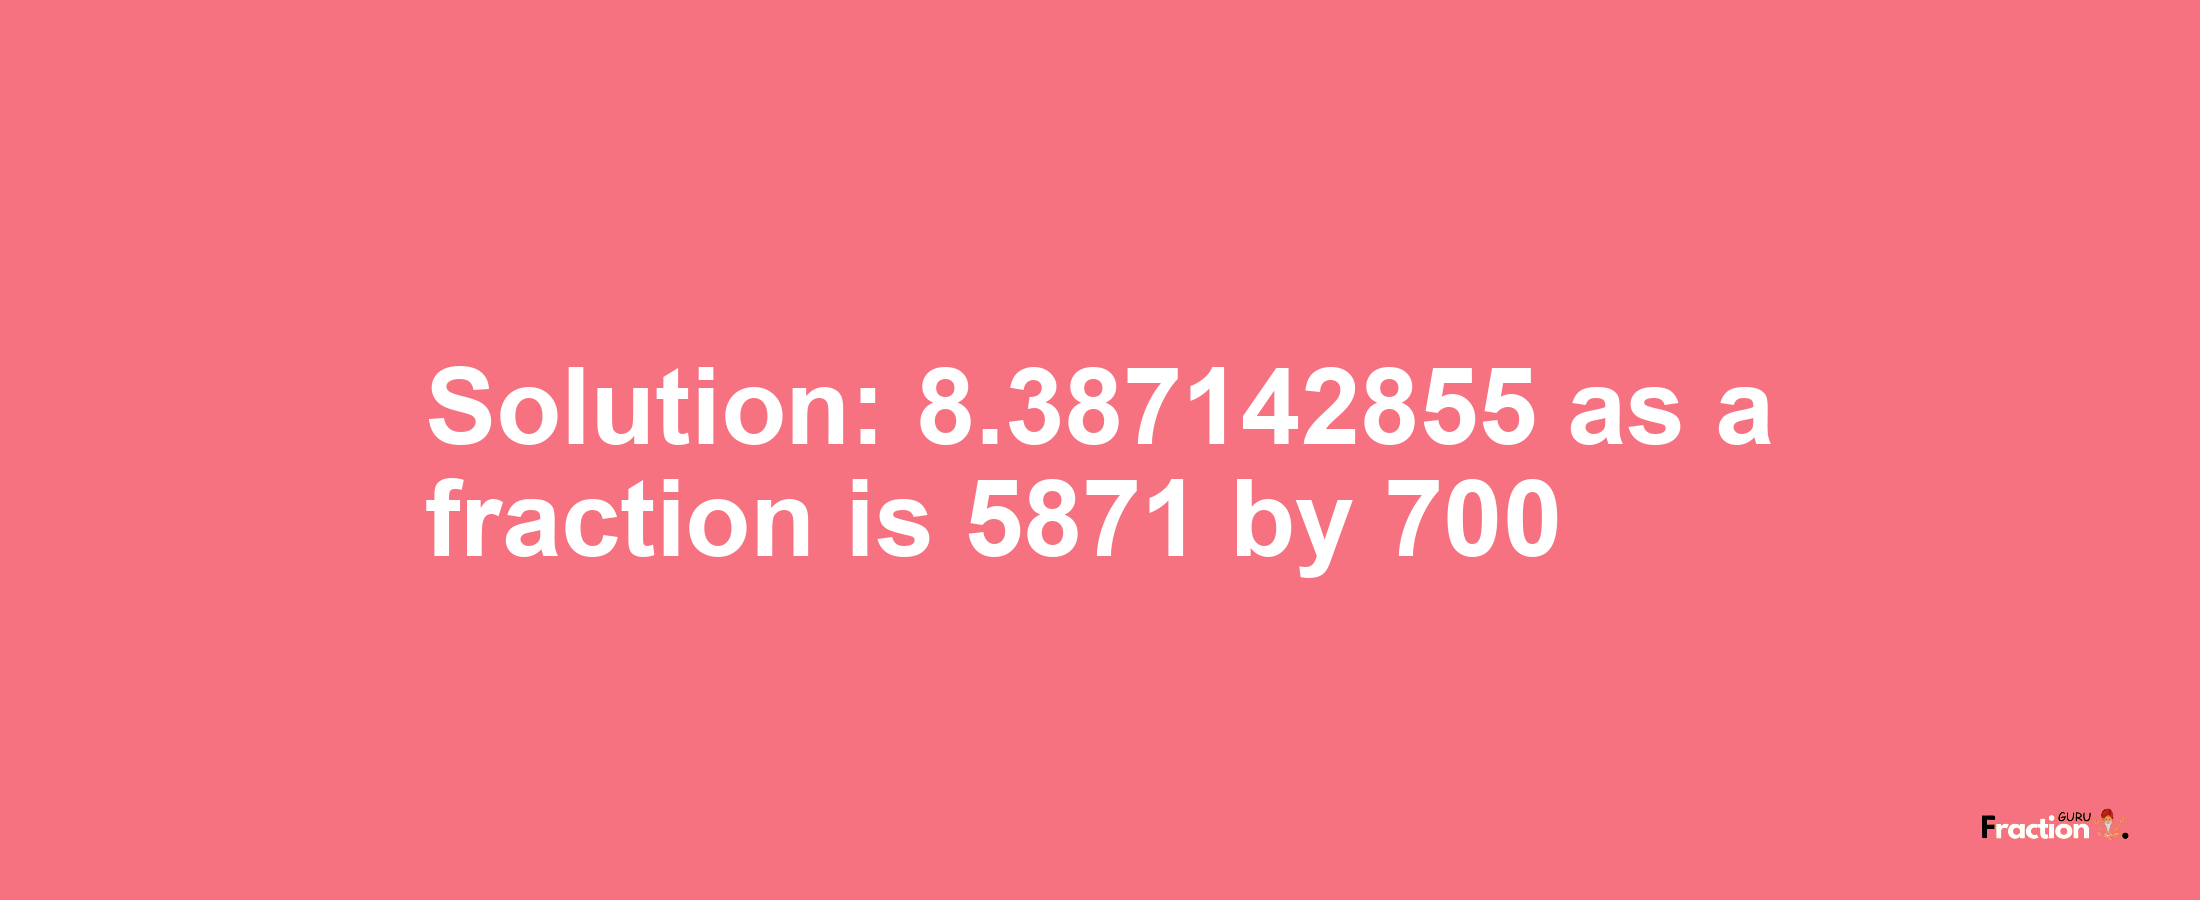 Solution:8.387142855 as a fraction is 5871/700